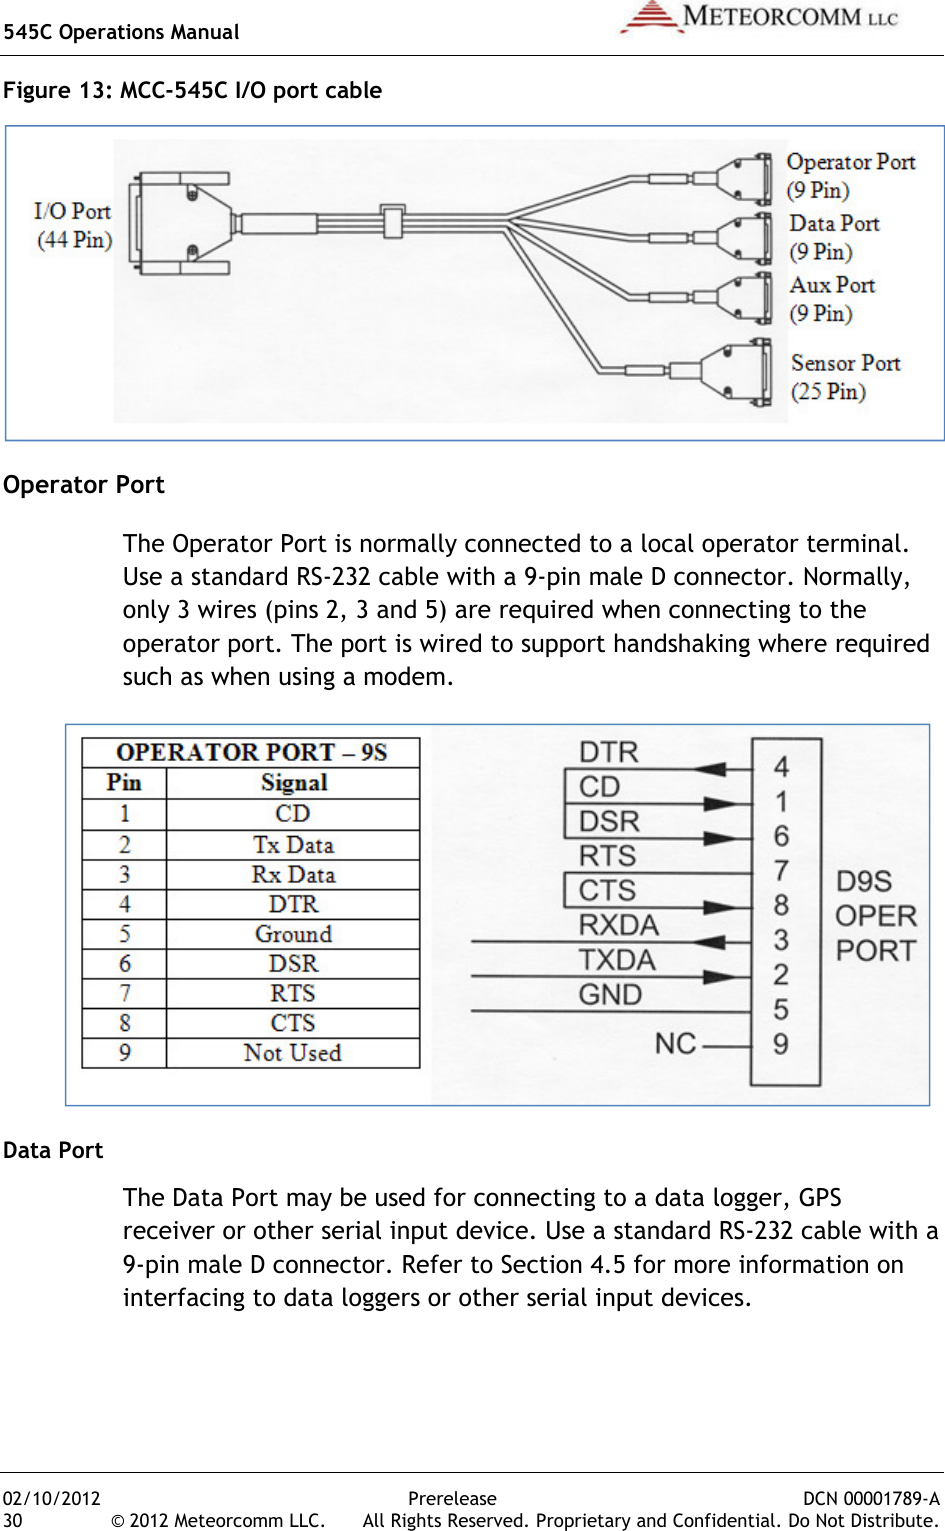 545C Operations Manual   02/10/2012  Prerelease  DCN 00001789-A 30  © 2012 Meteorcomm LLC.   All Rights Reserved. Proprietary and Confidential. Do Not Distribute. Figure 13: MCC-545C I/O port cable  Operator Port The Operator Port is normally connected to a local operator terminal. Use a standard RS-232 cable with a 9-pin male D connector. Normally, only 3 wires (pins 2, 3 and 5) are required when connecting to the operator port. The port is wired to support handshaking where required such as when using a modem.  Data Port The Data Port may be used for connecting to a data logger, GPS receiver or other serial input device. Use a standard RS-232 cable with a 9-pin male D connector. Refer to Section 4.5 for more information on interfacing to data loggers or other serial input devices. 